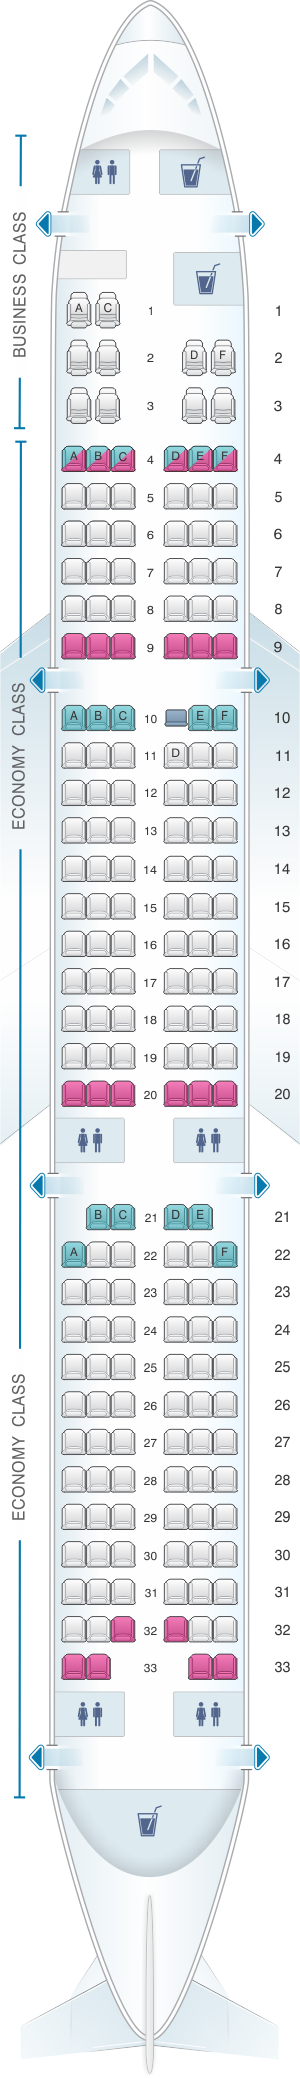 Seat map for Egyptair Airbus A321 231